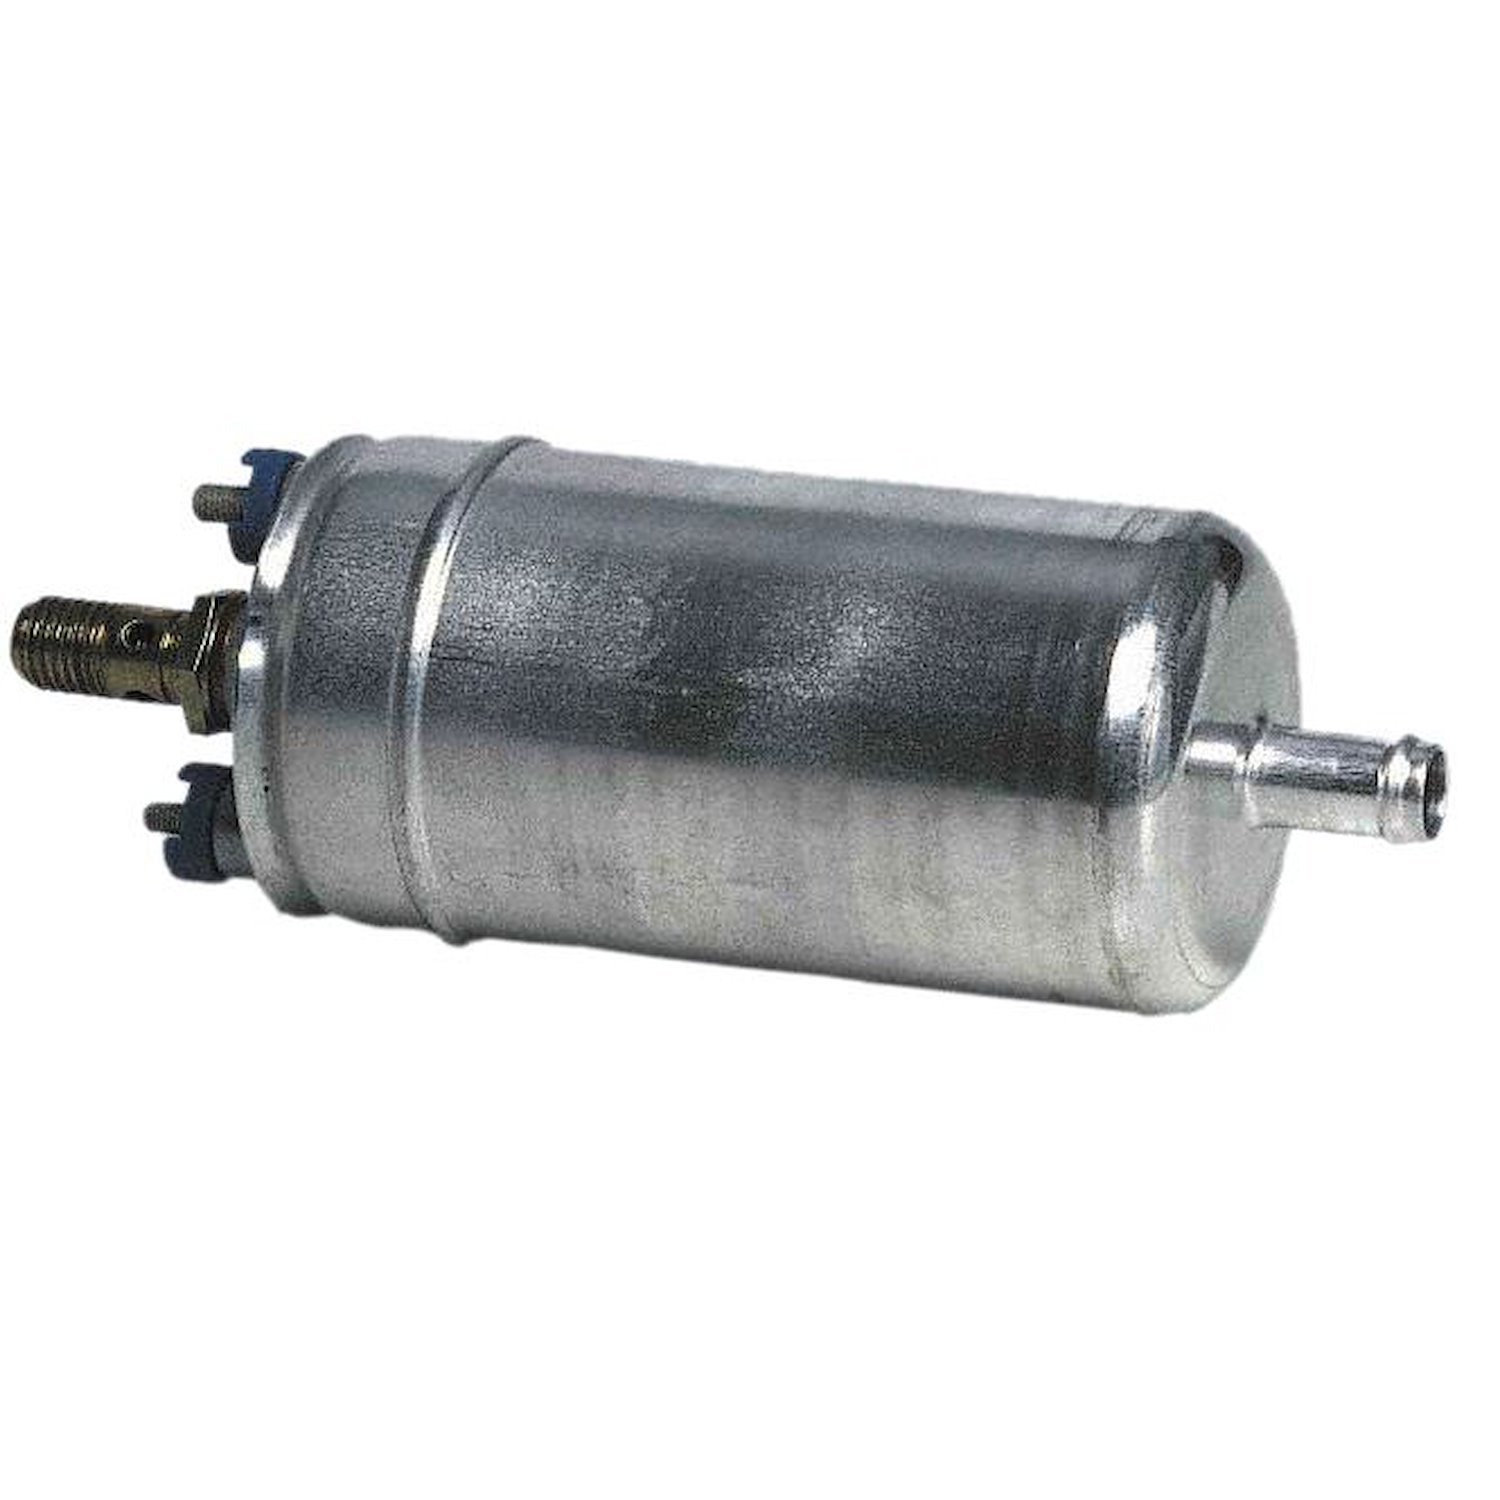 Replacement In-Line Electric Fuel Pump for 1988-1993 Chevy/GMC Full Size C/K Series